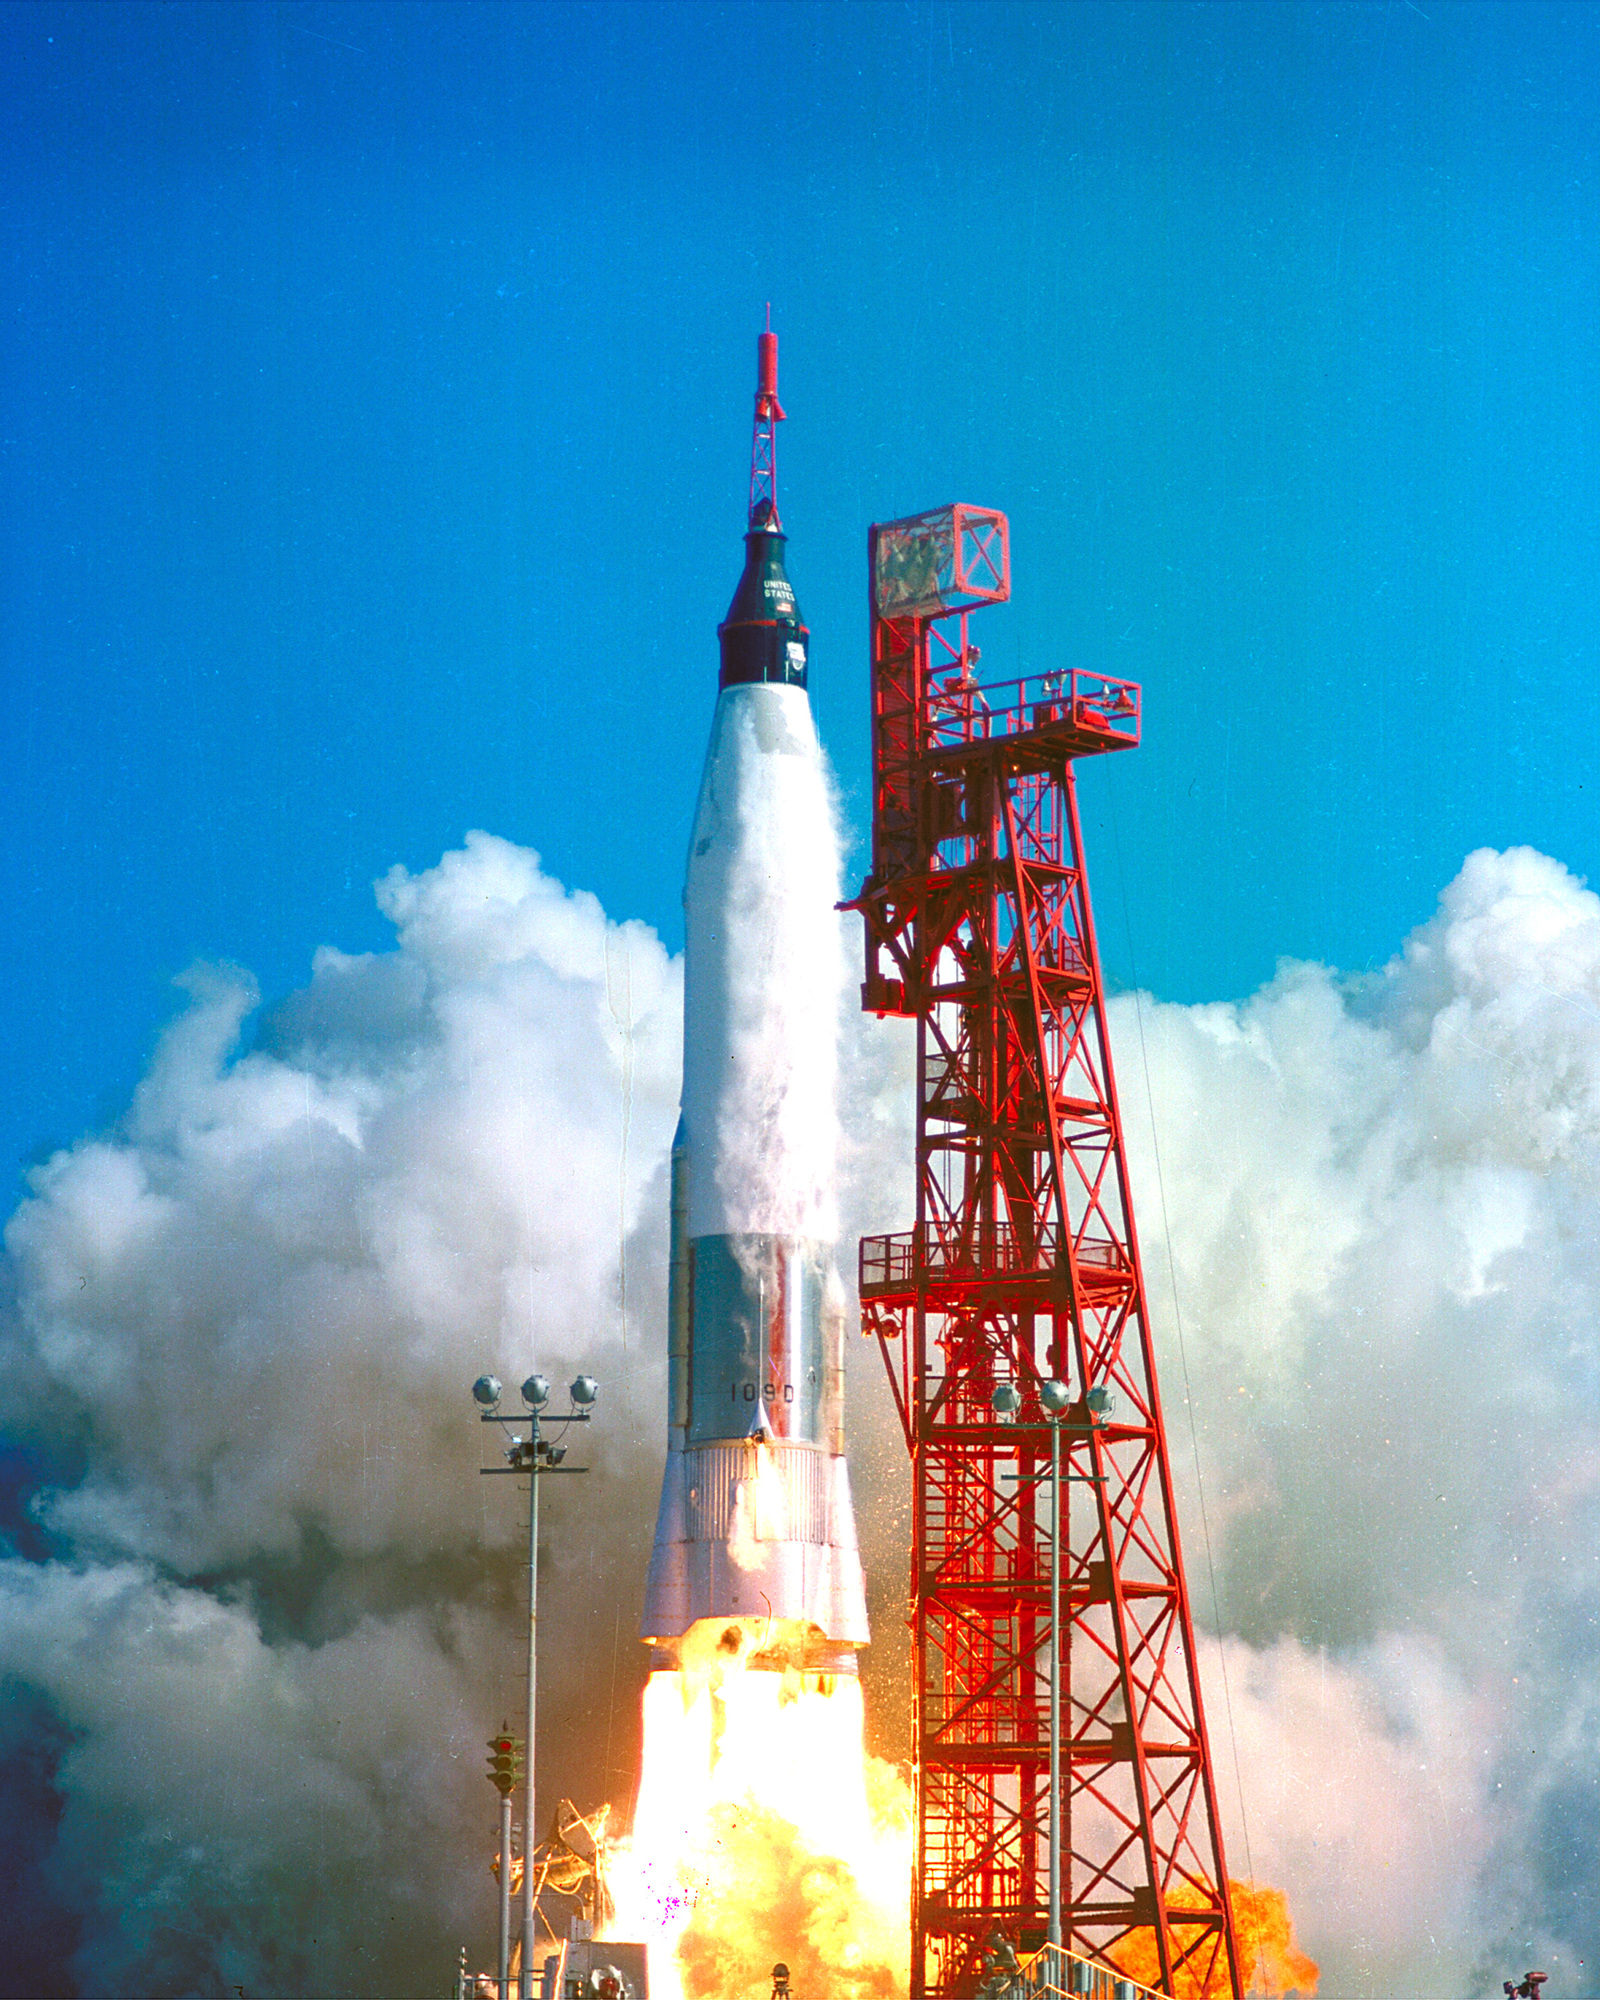 Friendship 7 launched from Cape Canaveral on Feb. 20, 1962.  Photo courtesy of NASA